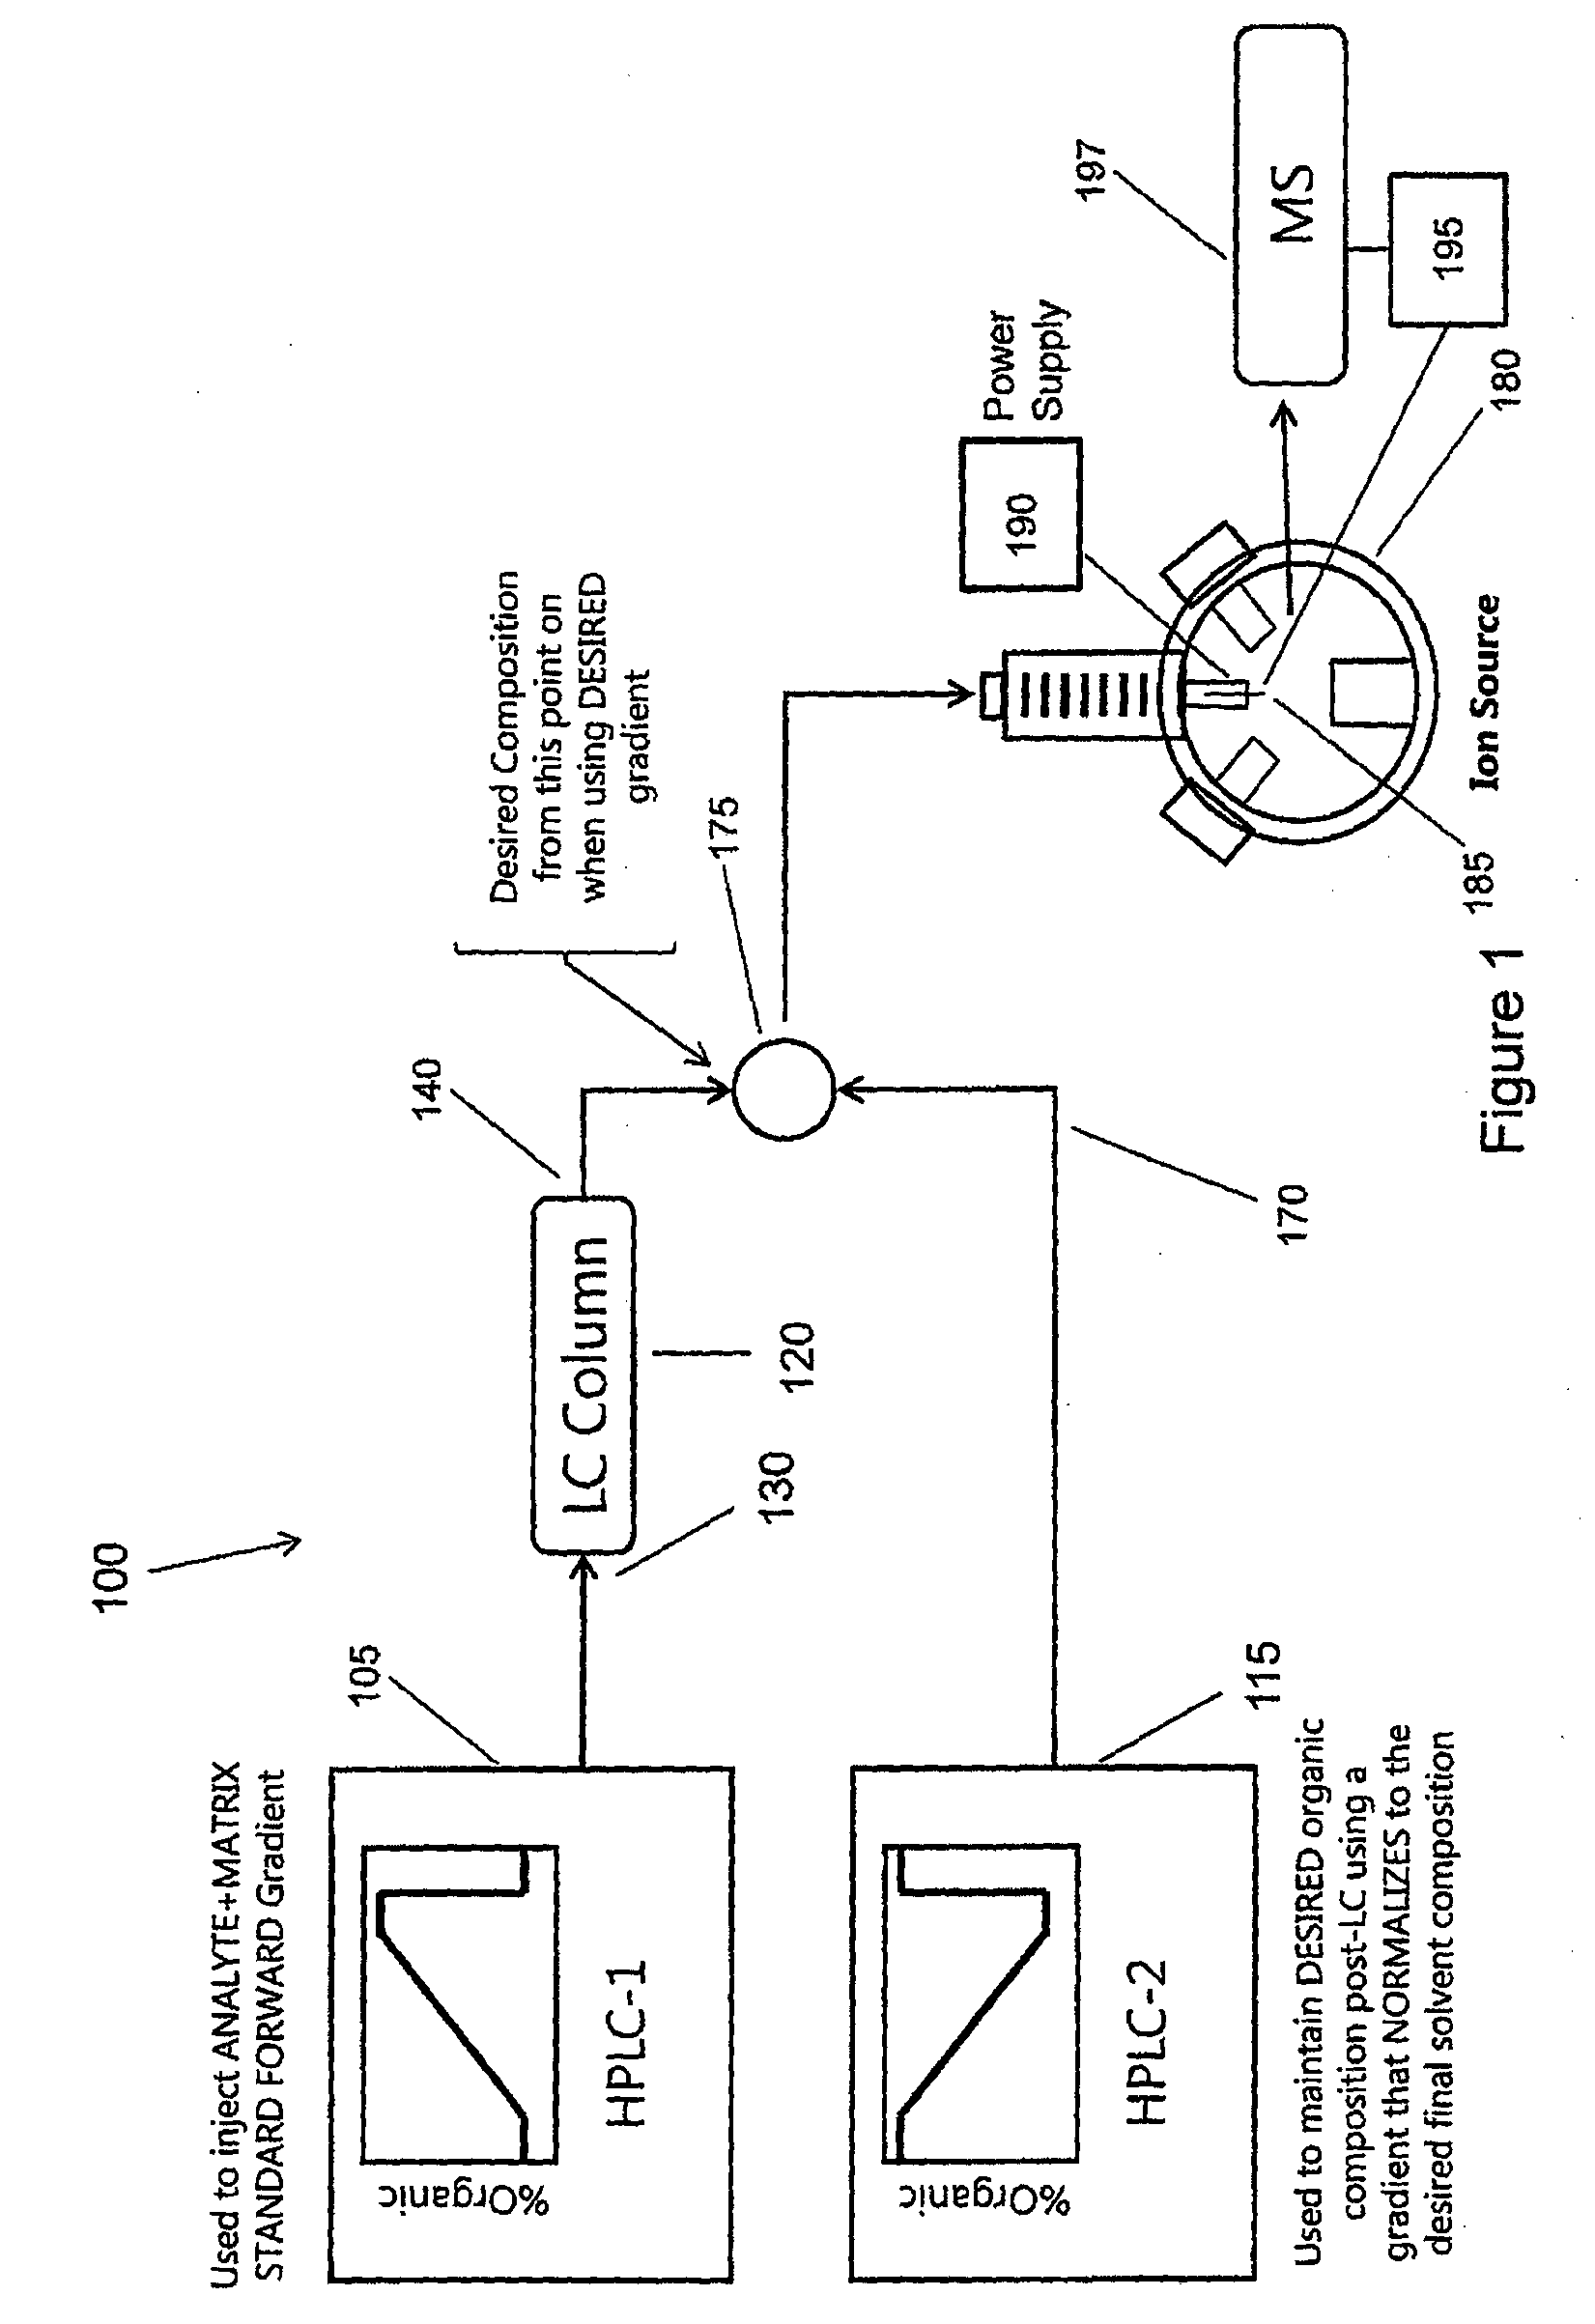 Method and system for introducing make-up flow in an electrospray ion source system